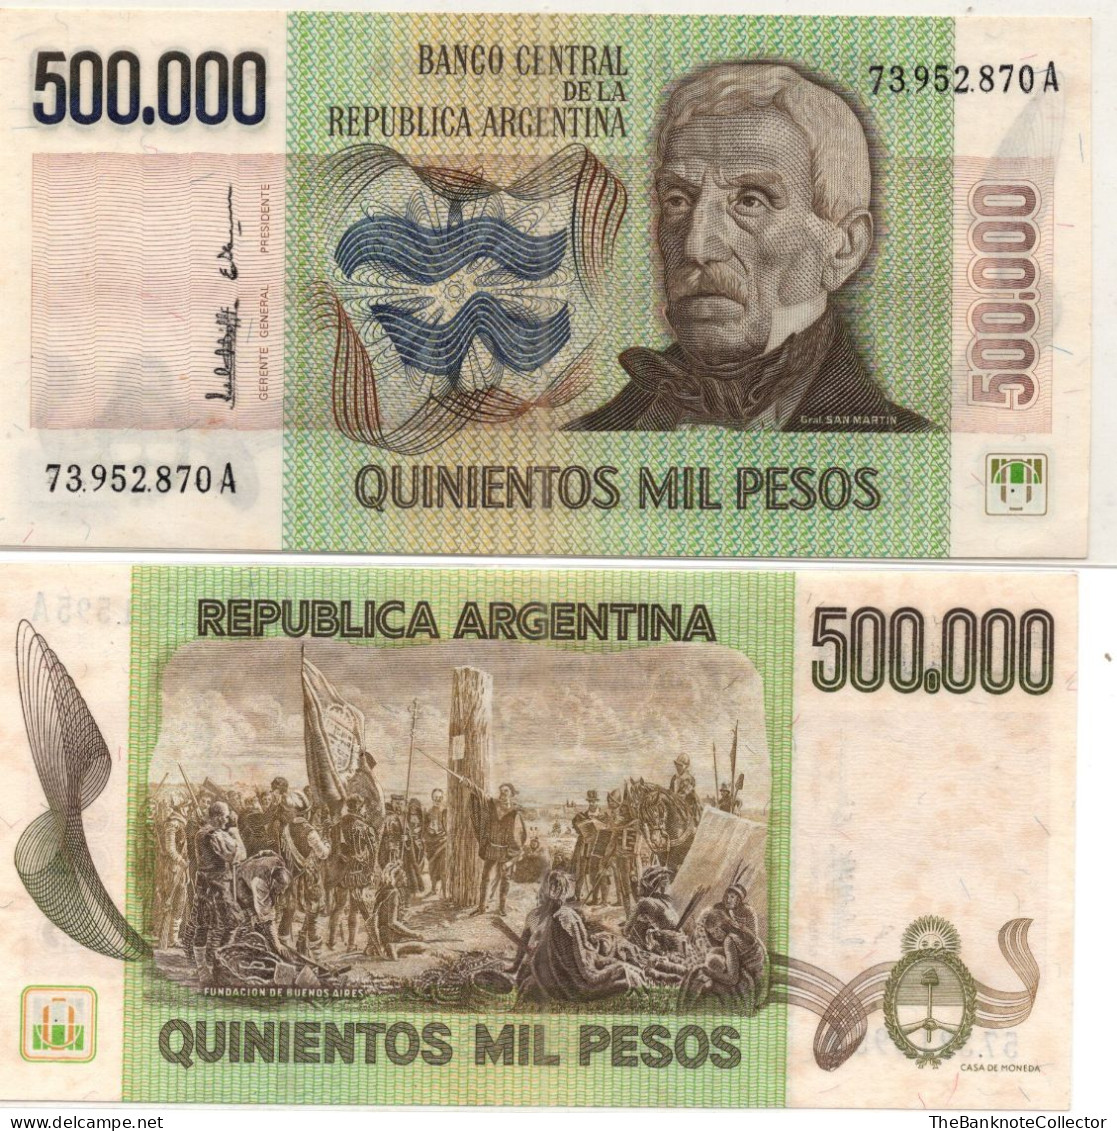 Argentina 500,000 Pesos ND 1979 P-309 AUNC-UNC Foxing Hyperinflation Series - Argentina